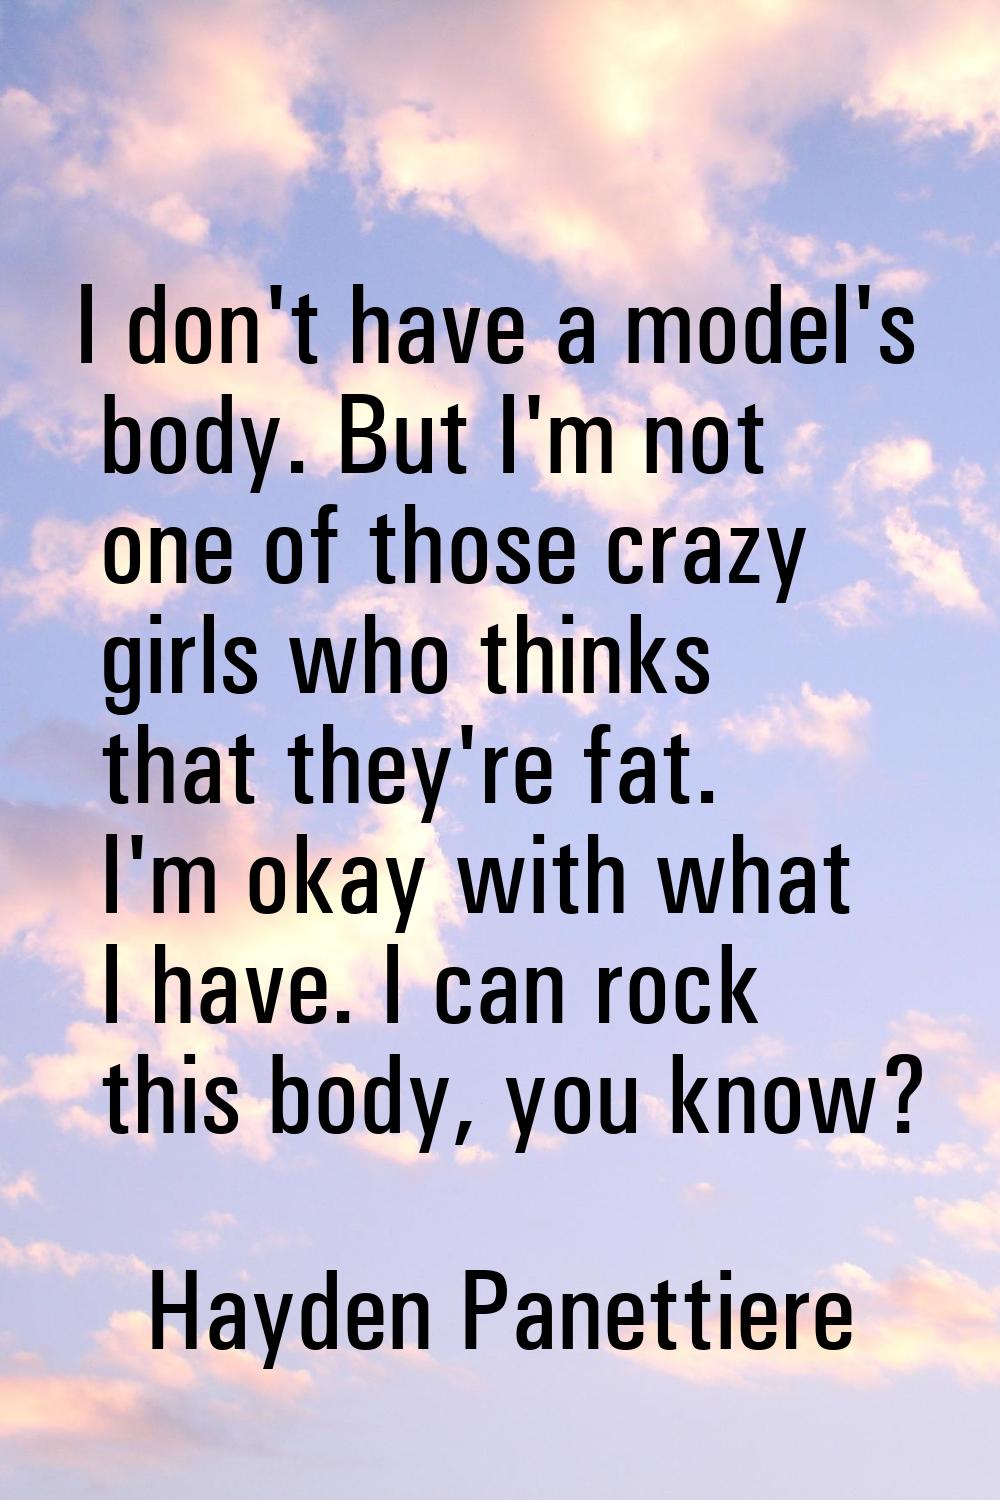 I don't have a model's body. But I'm not one of those crazy girls who thinks that they're fat. I'm 